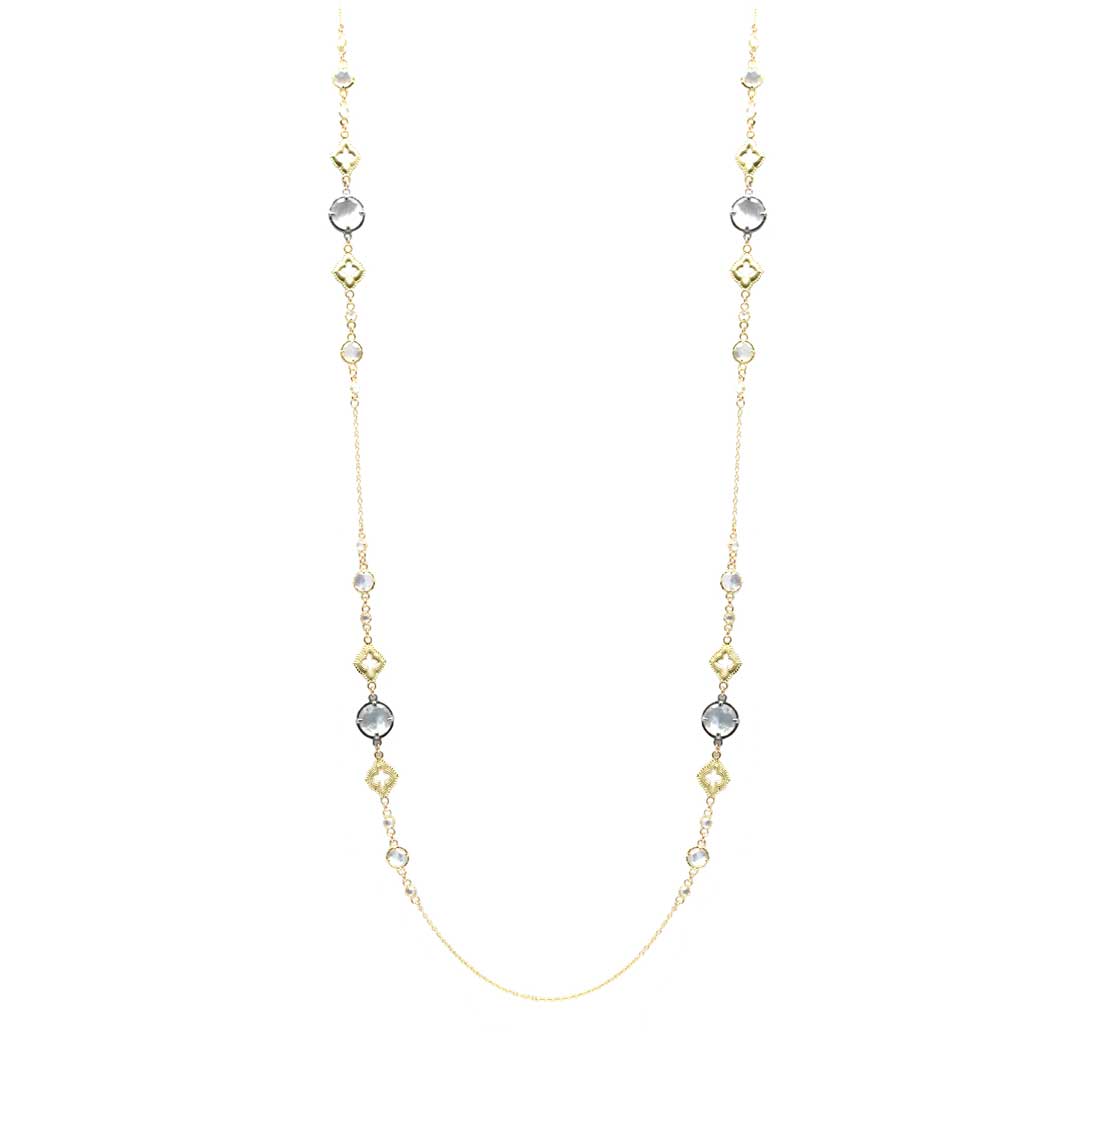 Armenta  "Sueno" Crivelli Oval Link Necklace in 18kt Yellow Gold